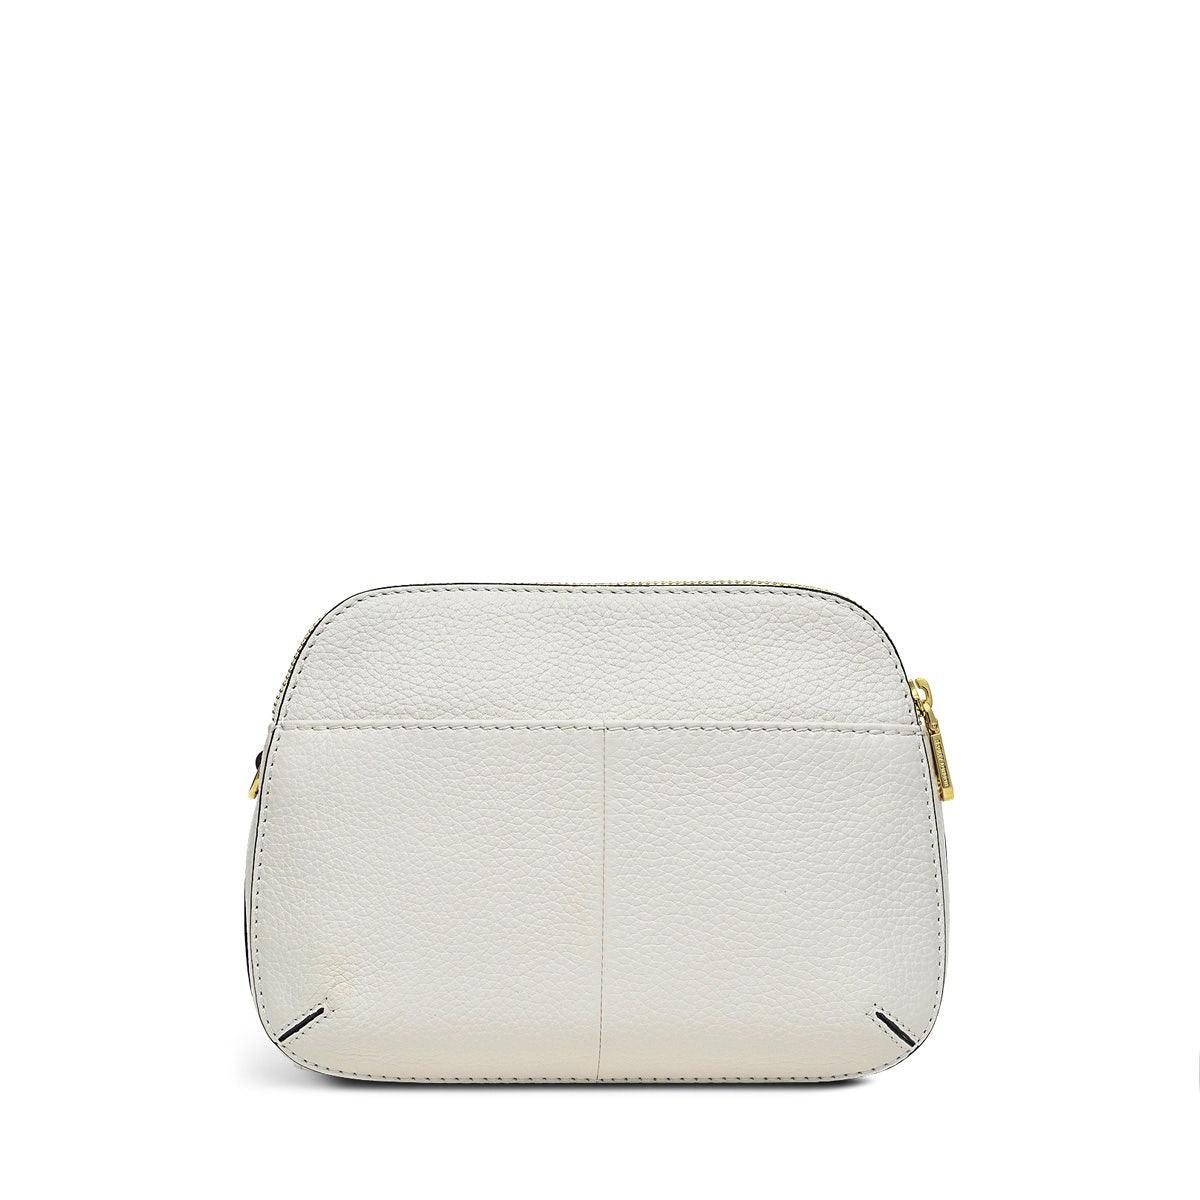 DUKES PLACE - Medium Zip-Top Cross Body - RUTHERFORD & Co